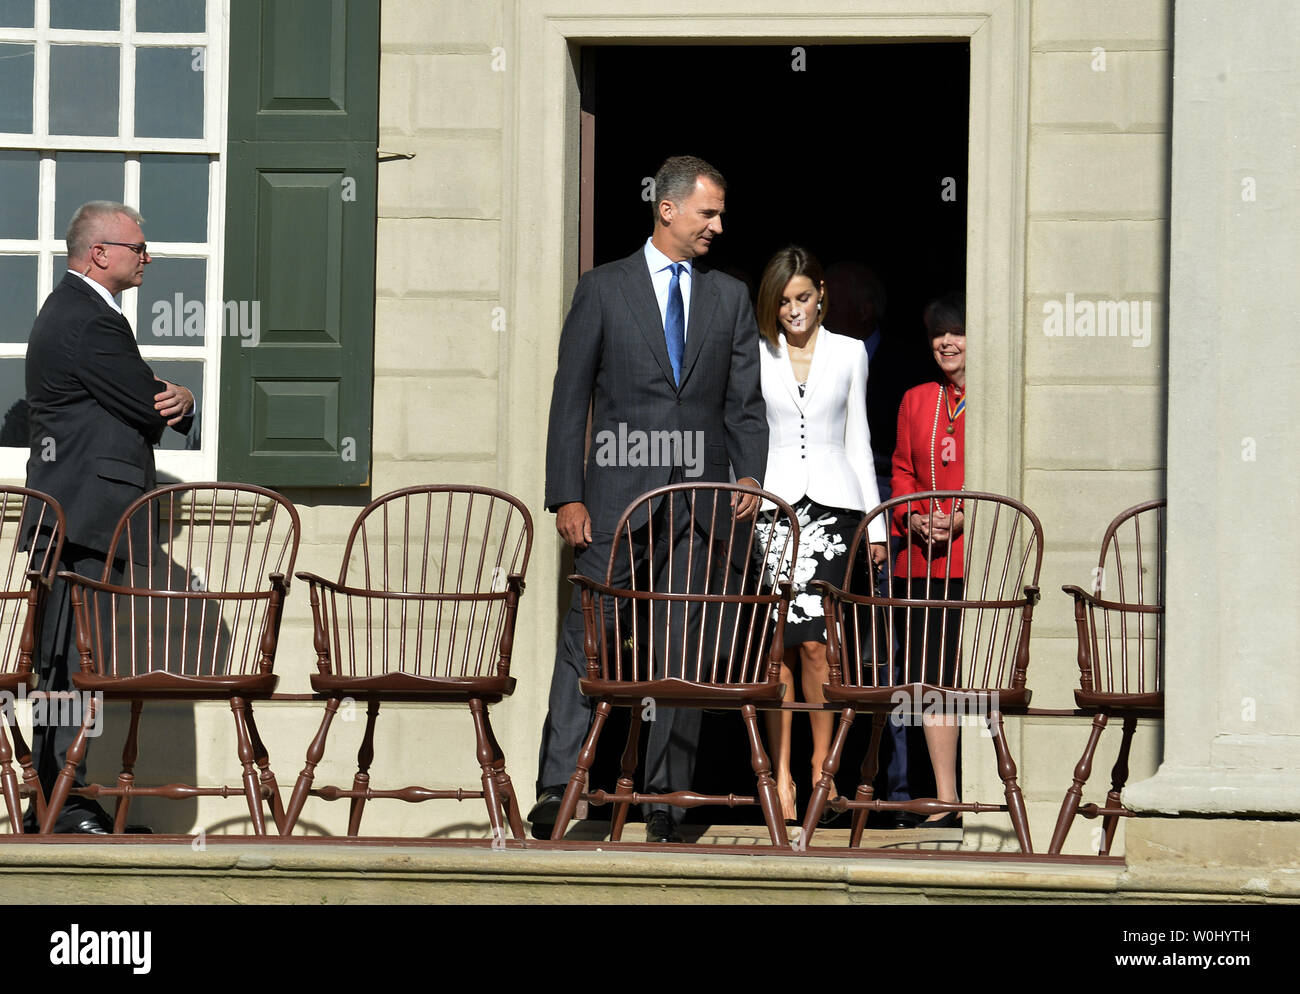 Spain's King Felipe VI (L) and Queen Letizia depart the residence of America's first President George Washington after a tour, September 15, 2015, at Mount Vernon, Virginia. The Royals visit was to emphasize the long standing historic relations between Spain and the United States.     Photo by Mike Theiler/UPI Stock Photo